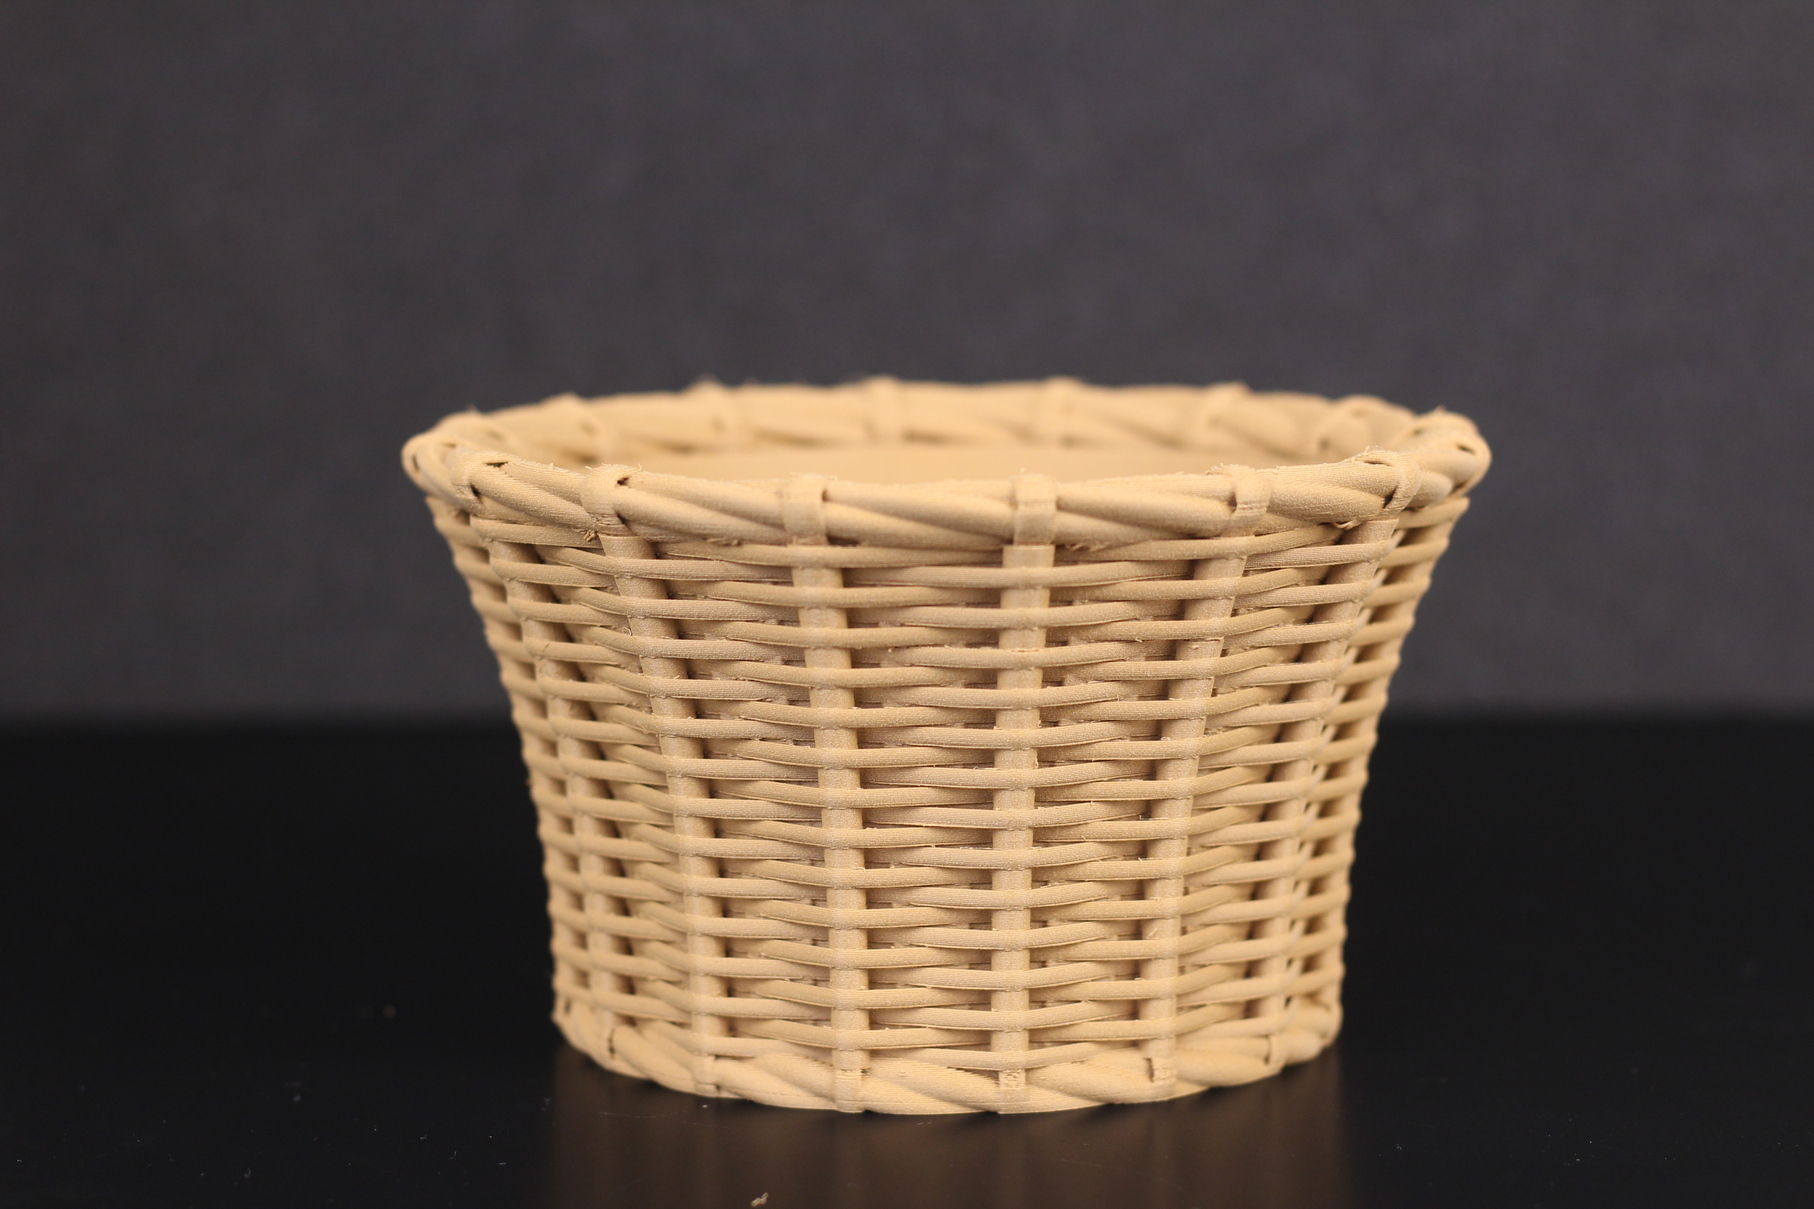 Rattan Basket printed on CR 10 Smart 2 | Creality CR-10 Smart Review: How smart it really is?